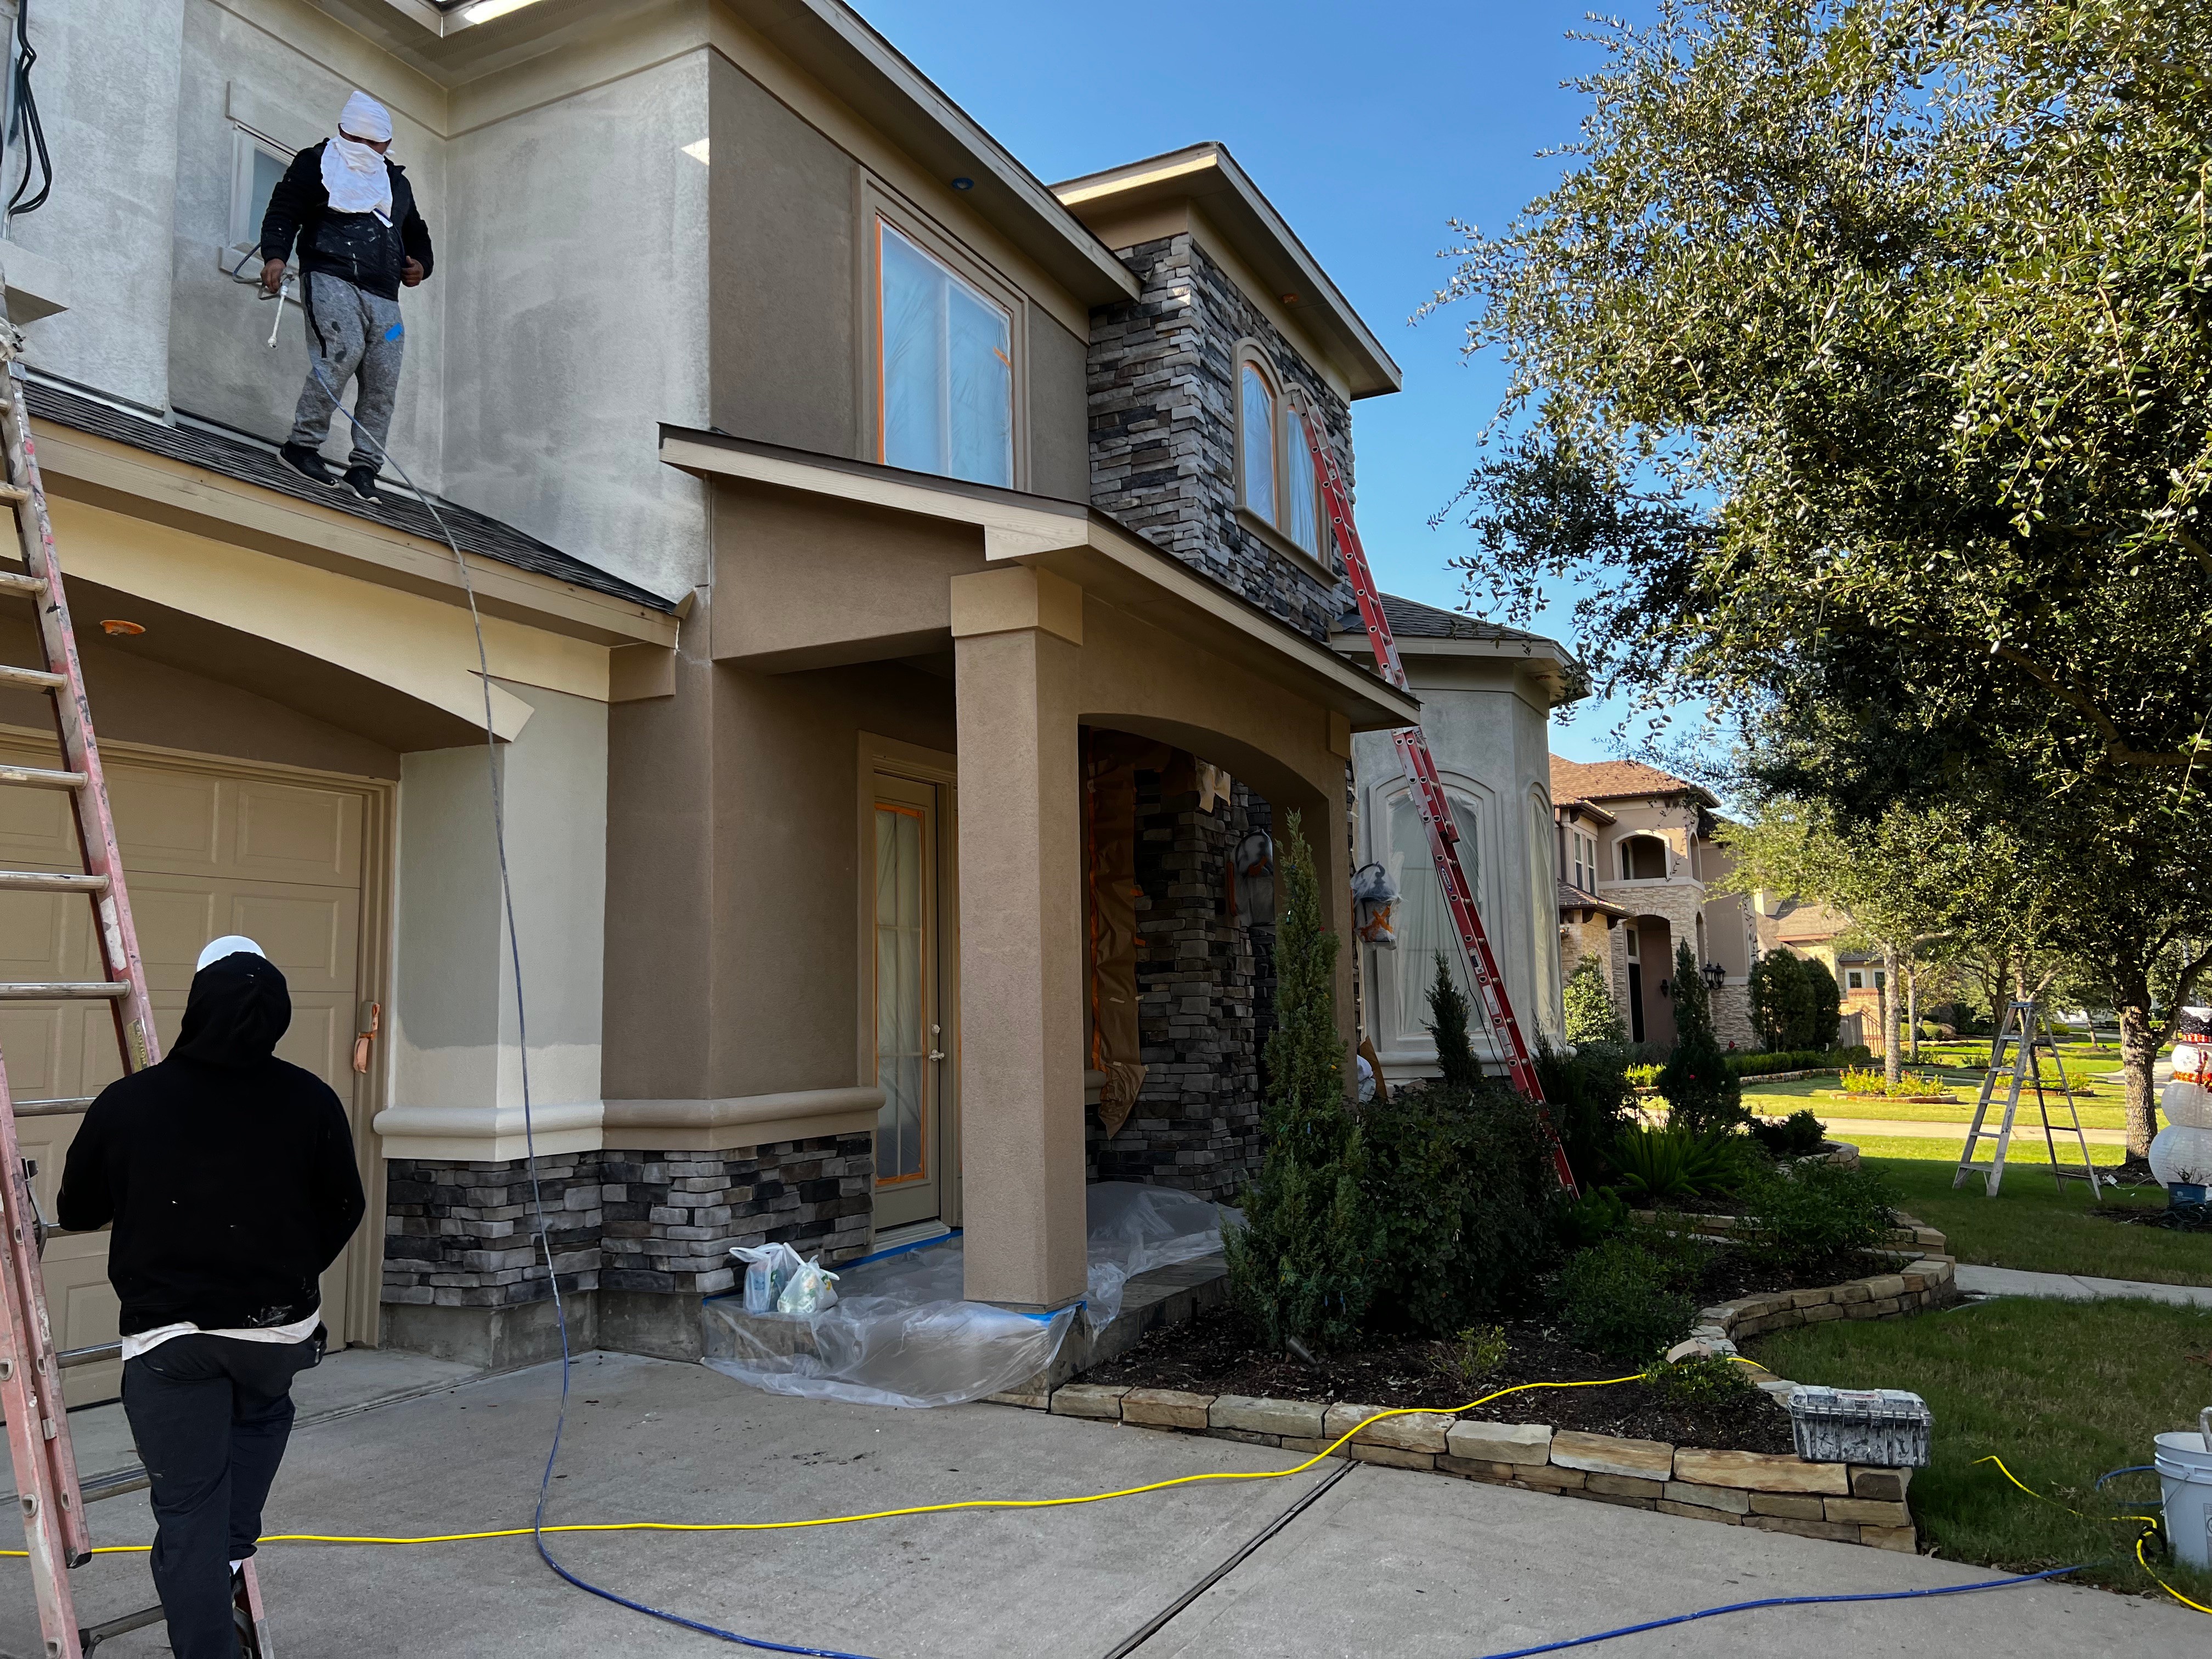 Stucco Painting & Elastomeric for 911 Painters in Houston, TX